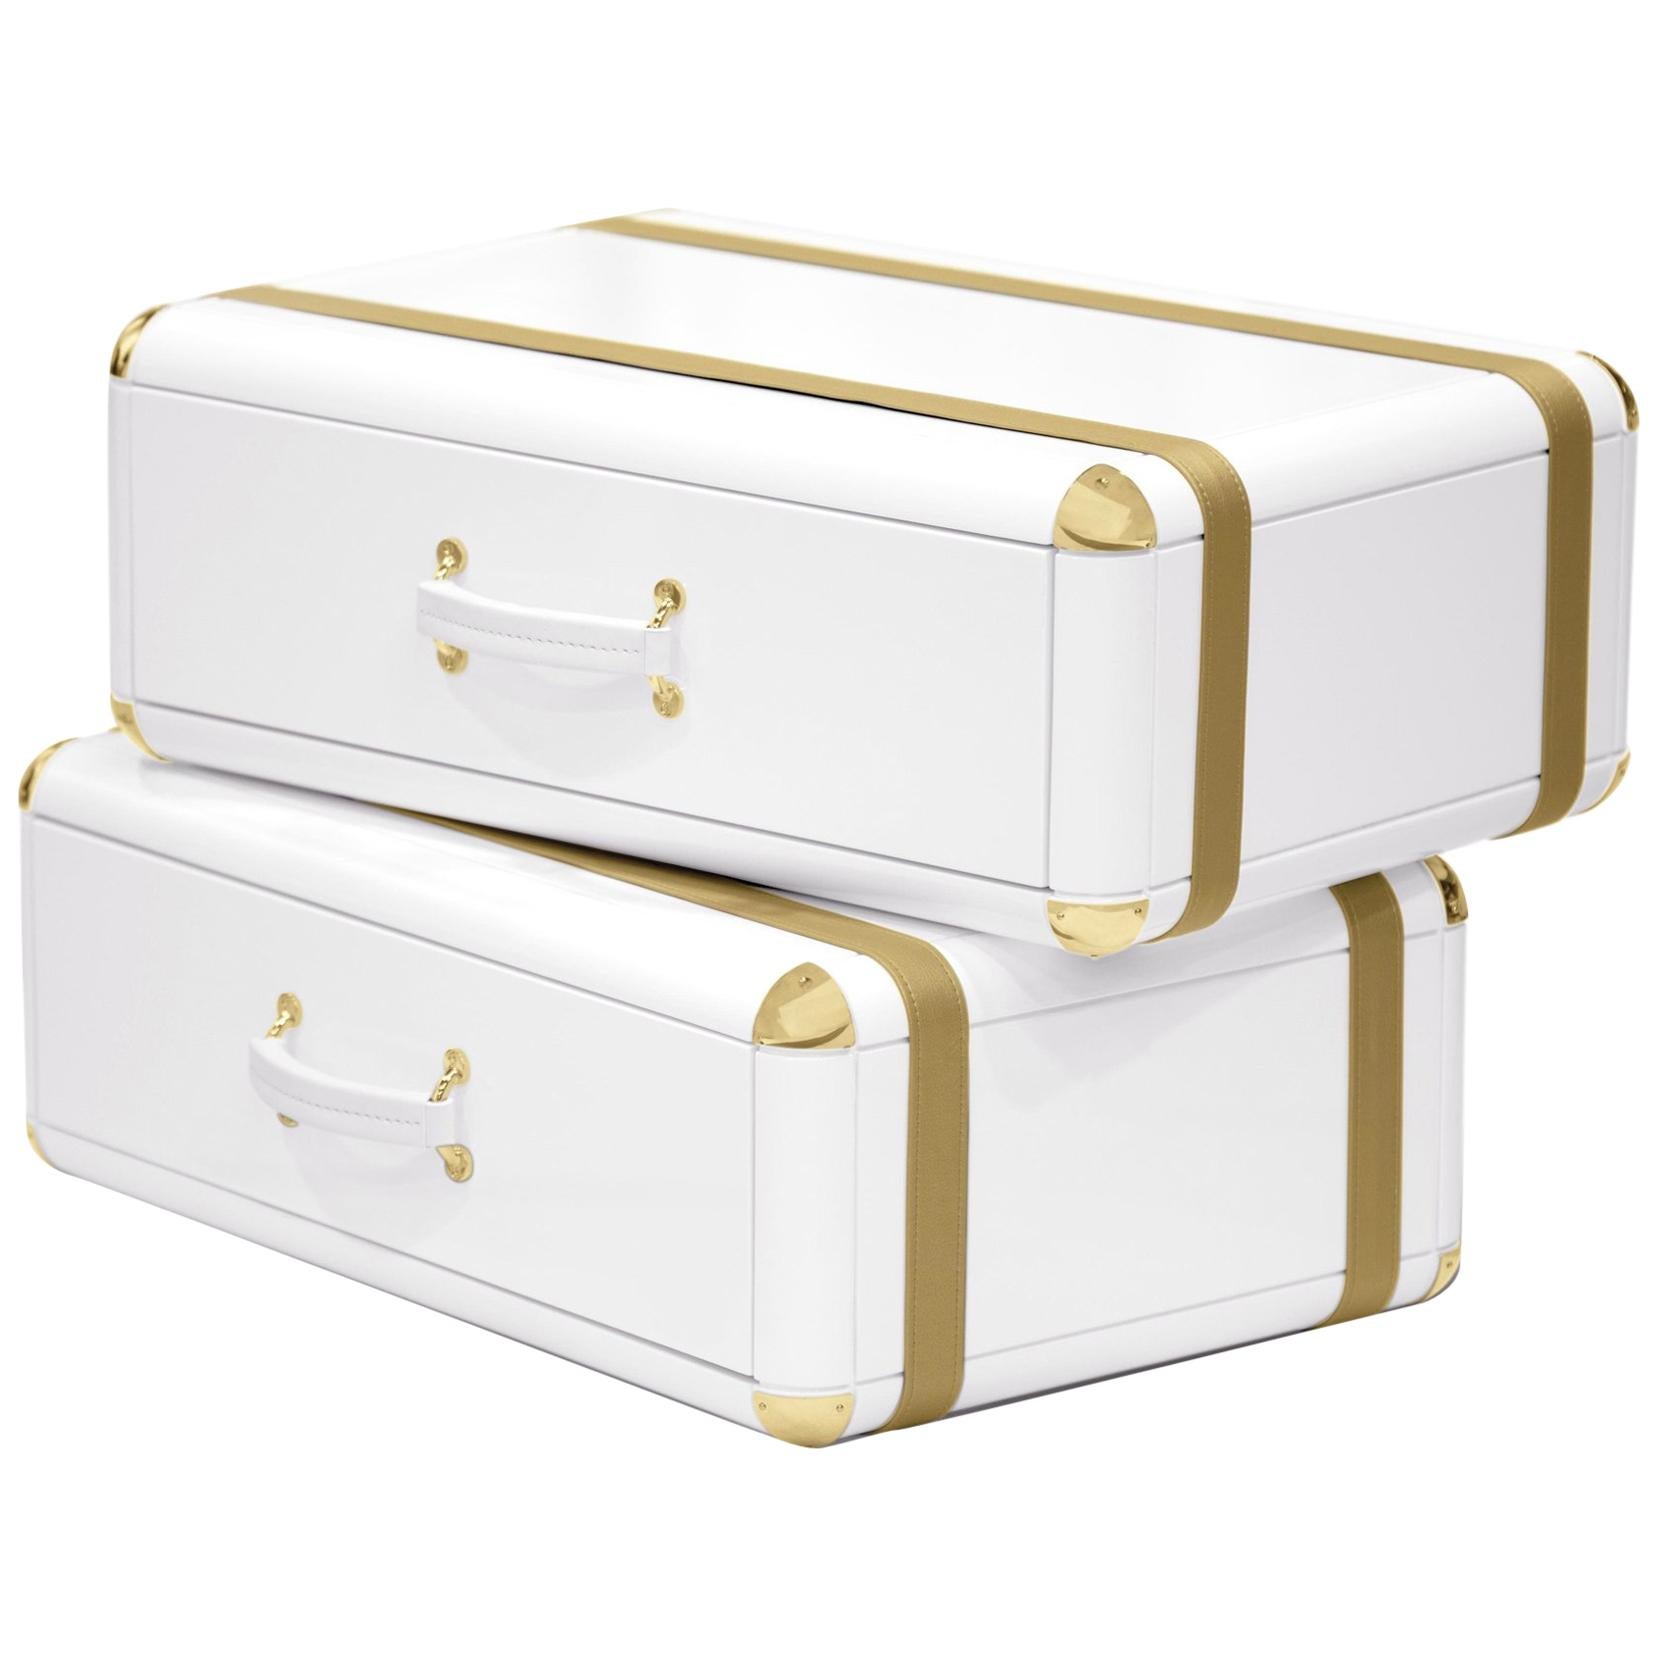 White Flight Case Shelf of 2 Drawers in White Lacquered Finish